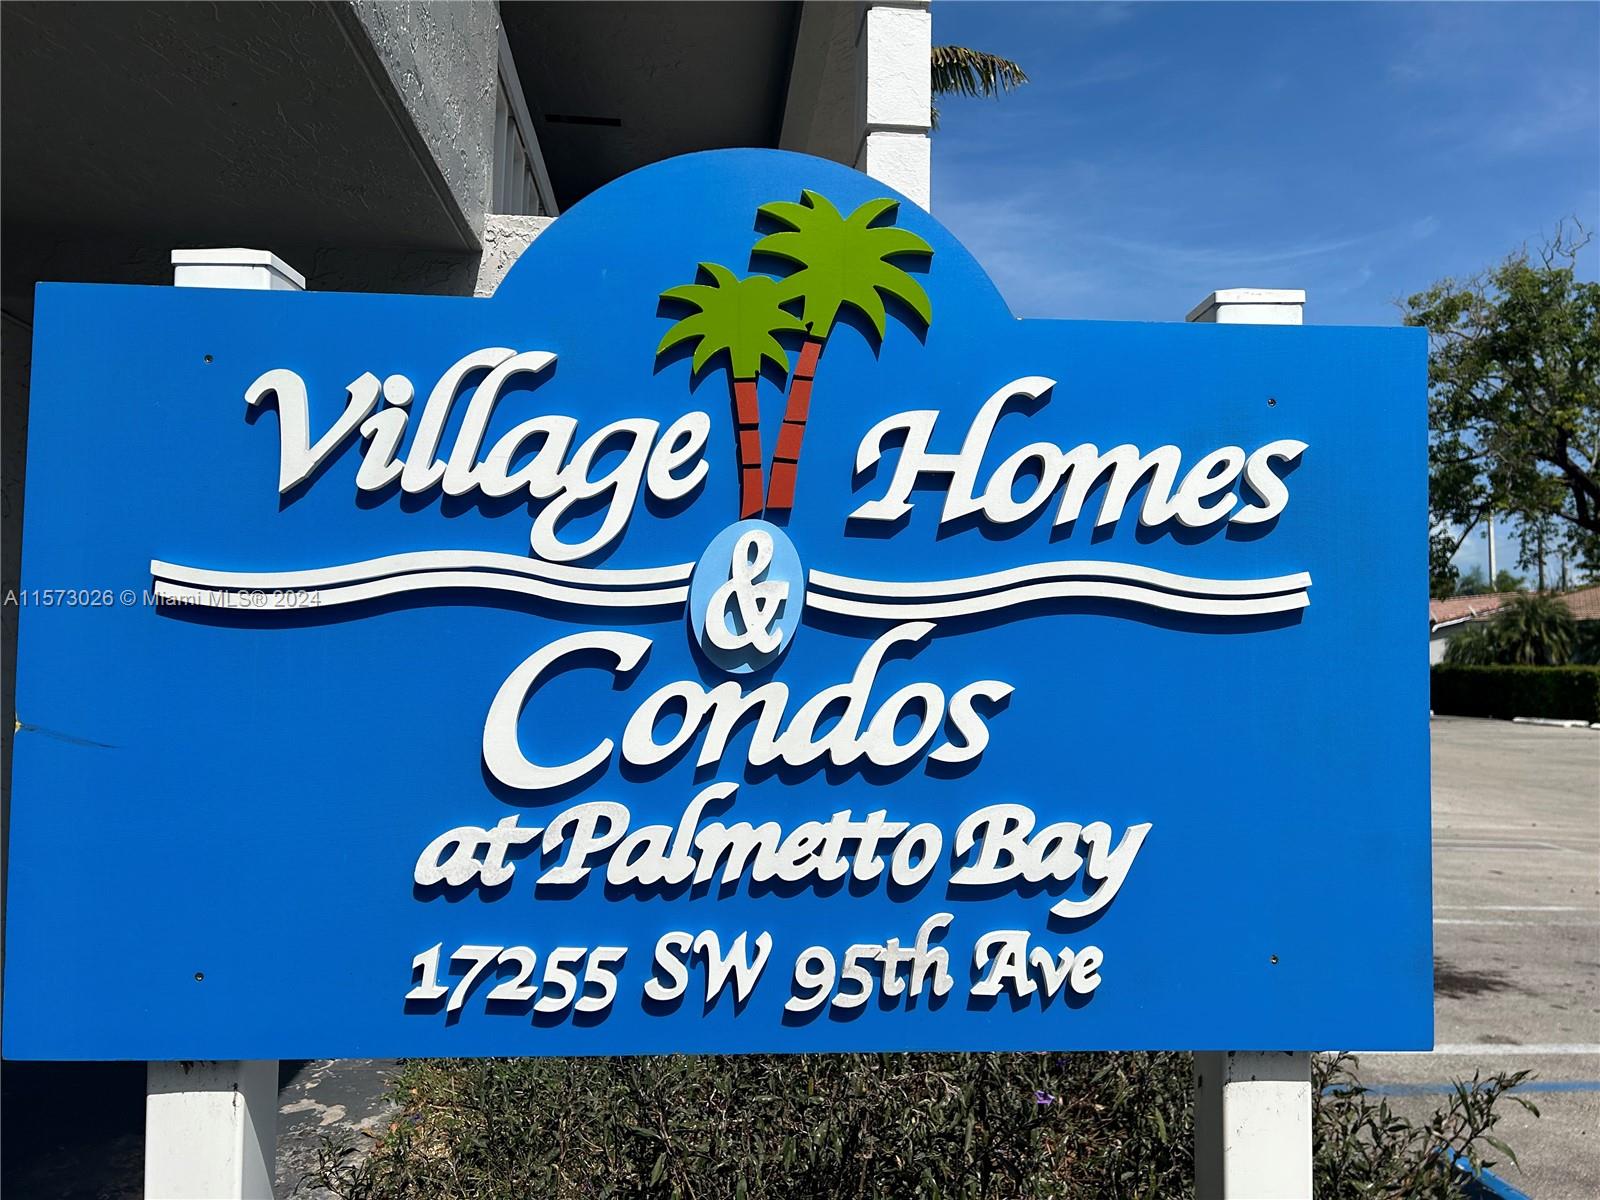 2/1 unit for rent in conveniently located Palmetto Bay offering easy access to US1, the Turnpike and Old Cutler Road as well as several Palmetto Bay and Cutler Bay restaurants and shops. The unit overlooks the community pool, which allows for plenty of natural night. Kitchen appliances are in good condition, and the unit is freshly painted. Laundry facilities on premises. Easy to show. The unit is not tenant occupied and ready to be rented immediately! First, last and security required. Prospective tenants must provide a copy of their driver's license, 4 months of most recent pay stubs, background check and credit check.